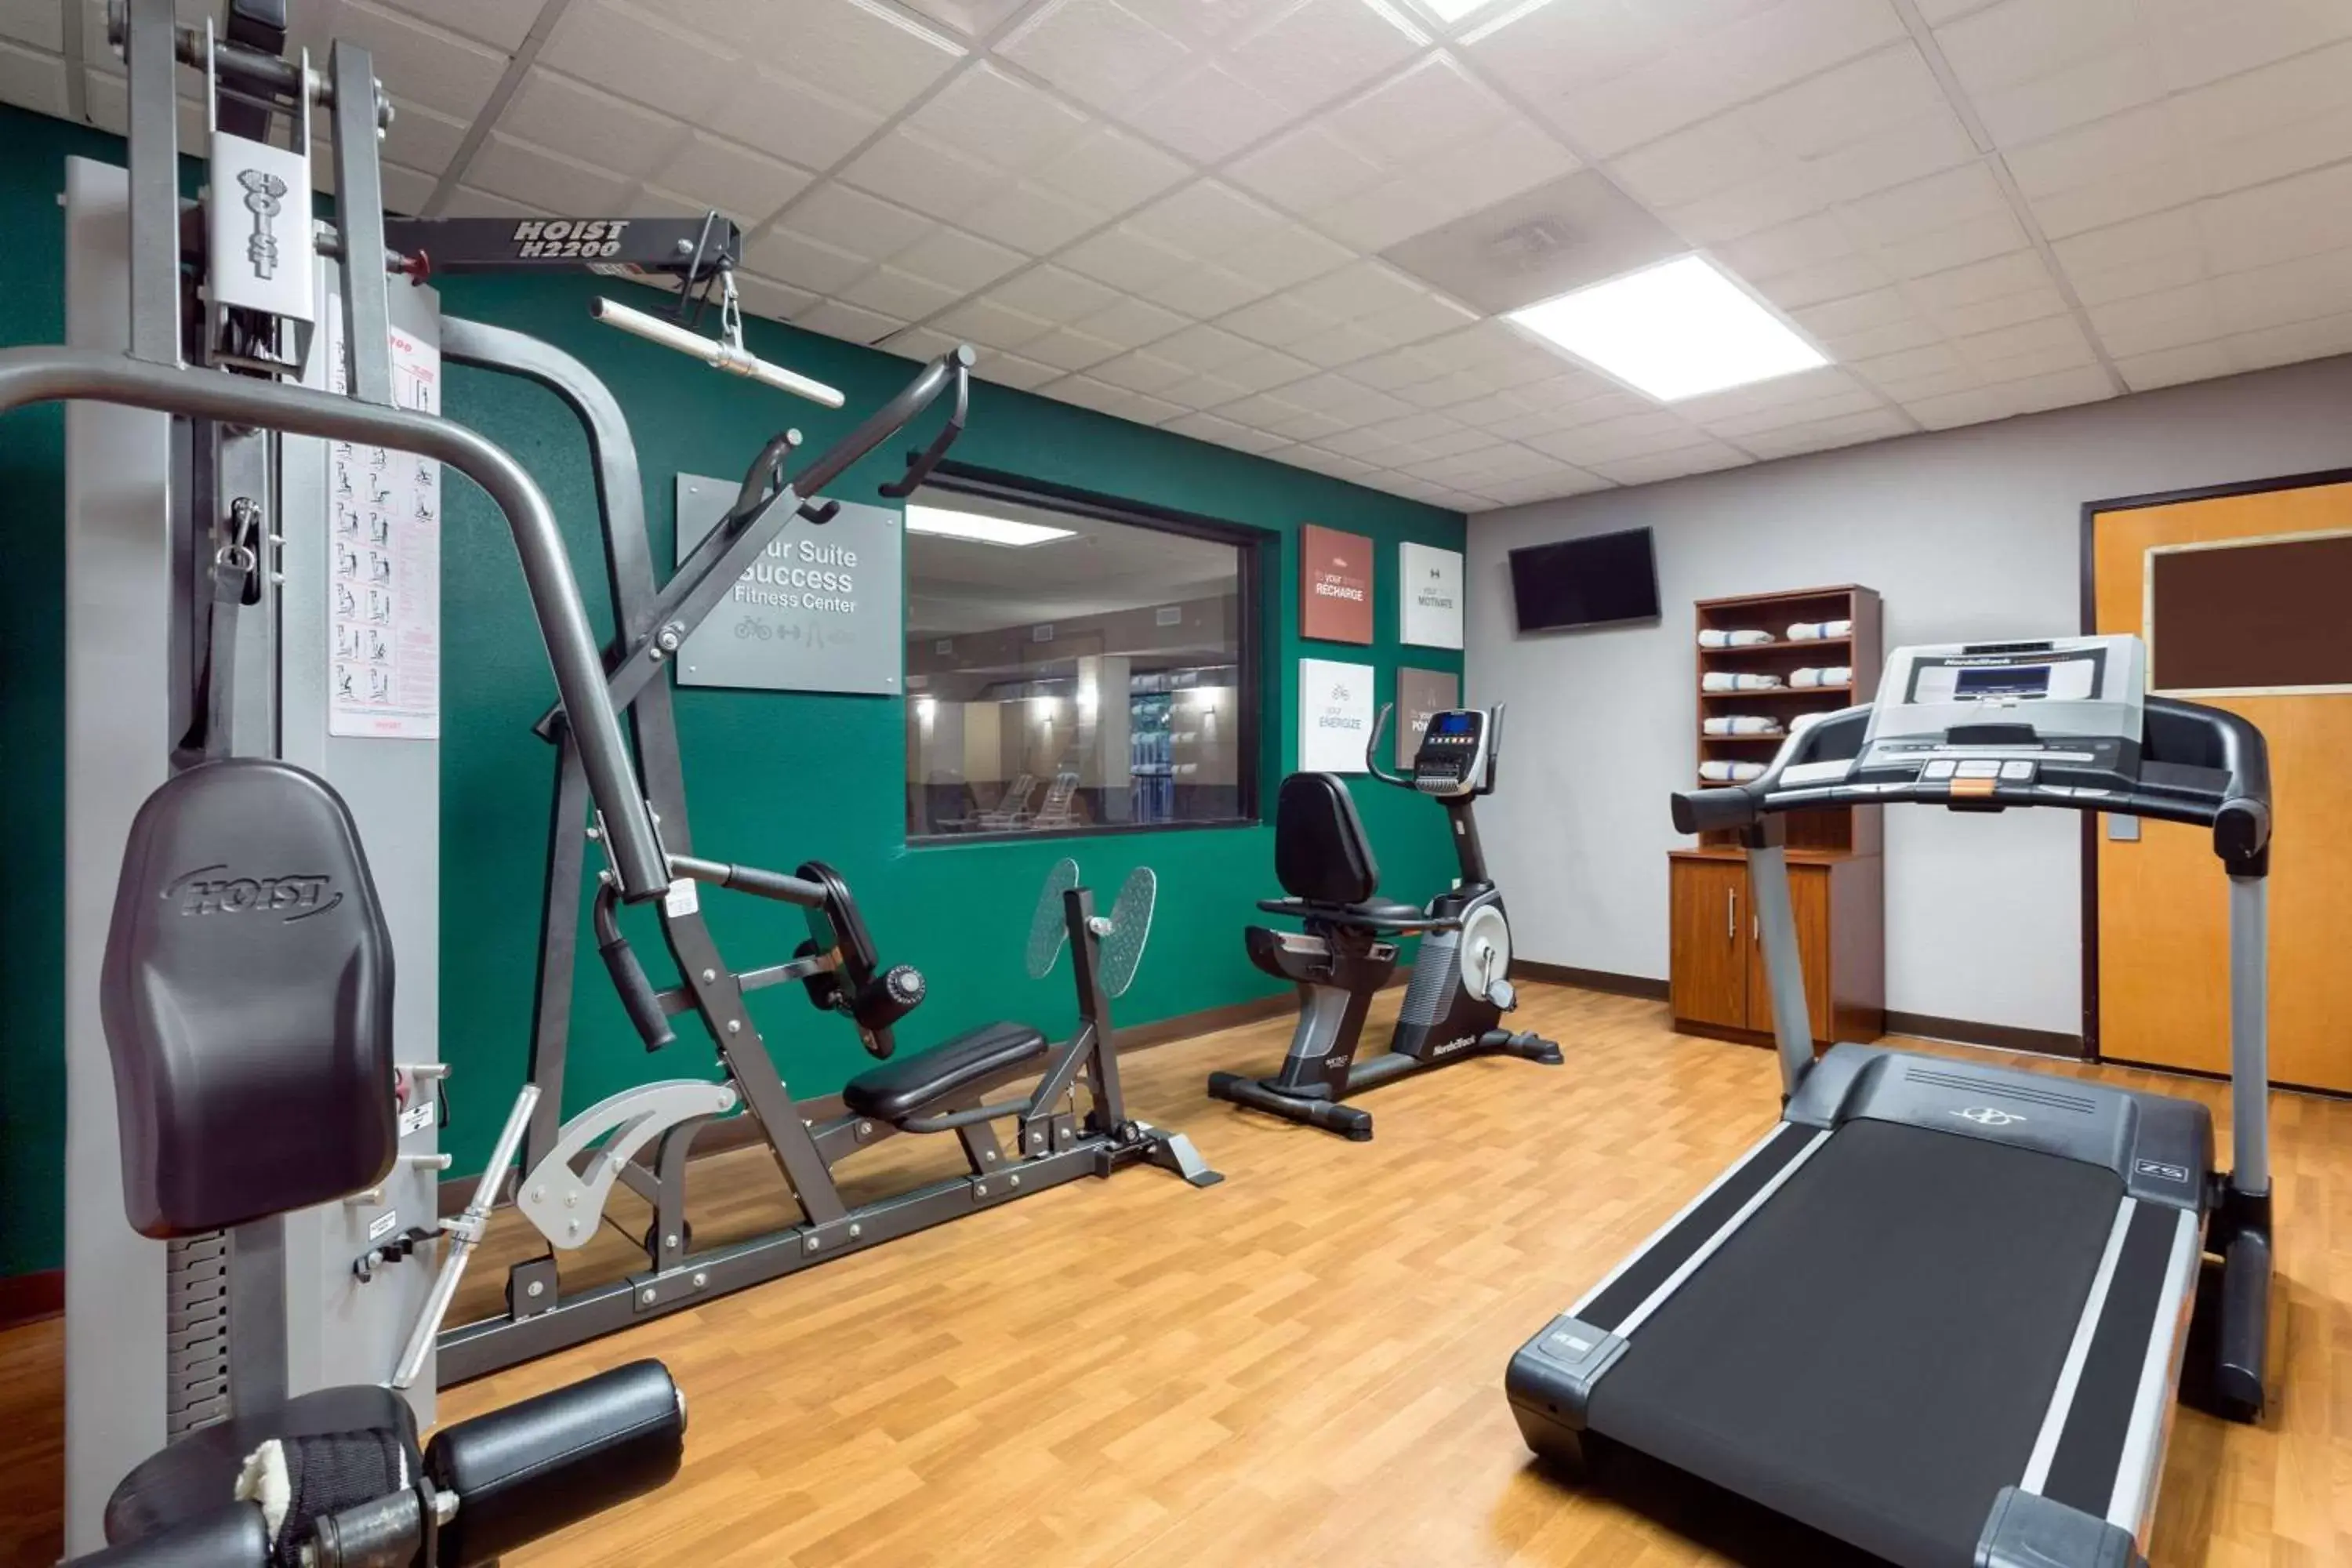 Fitness centre/facilities, Fitness Center/Facilities in Wingate by Wyndham Athens GA